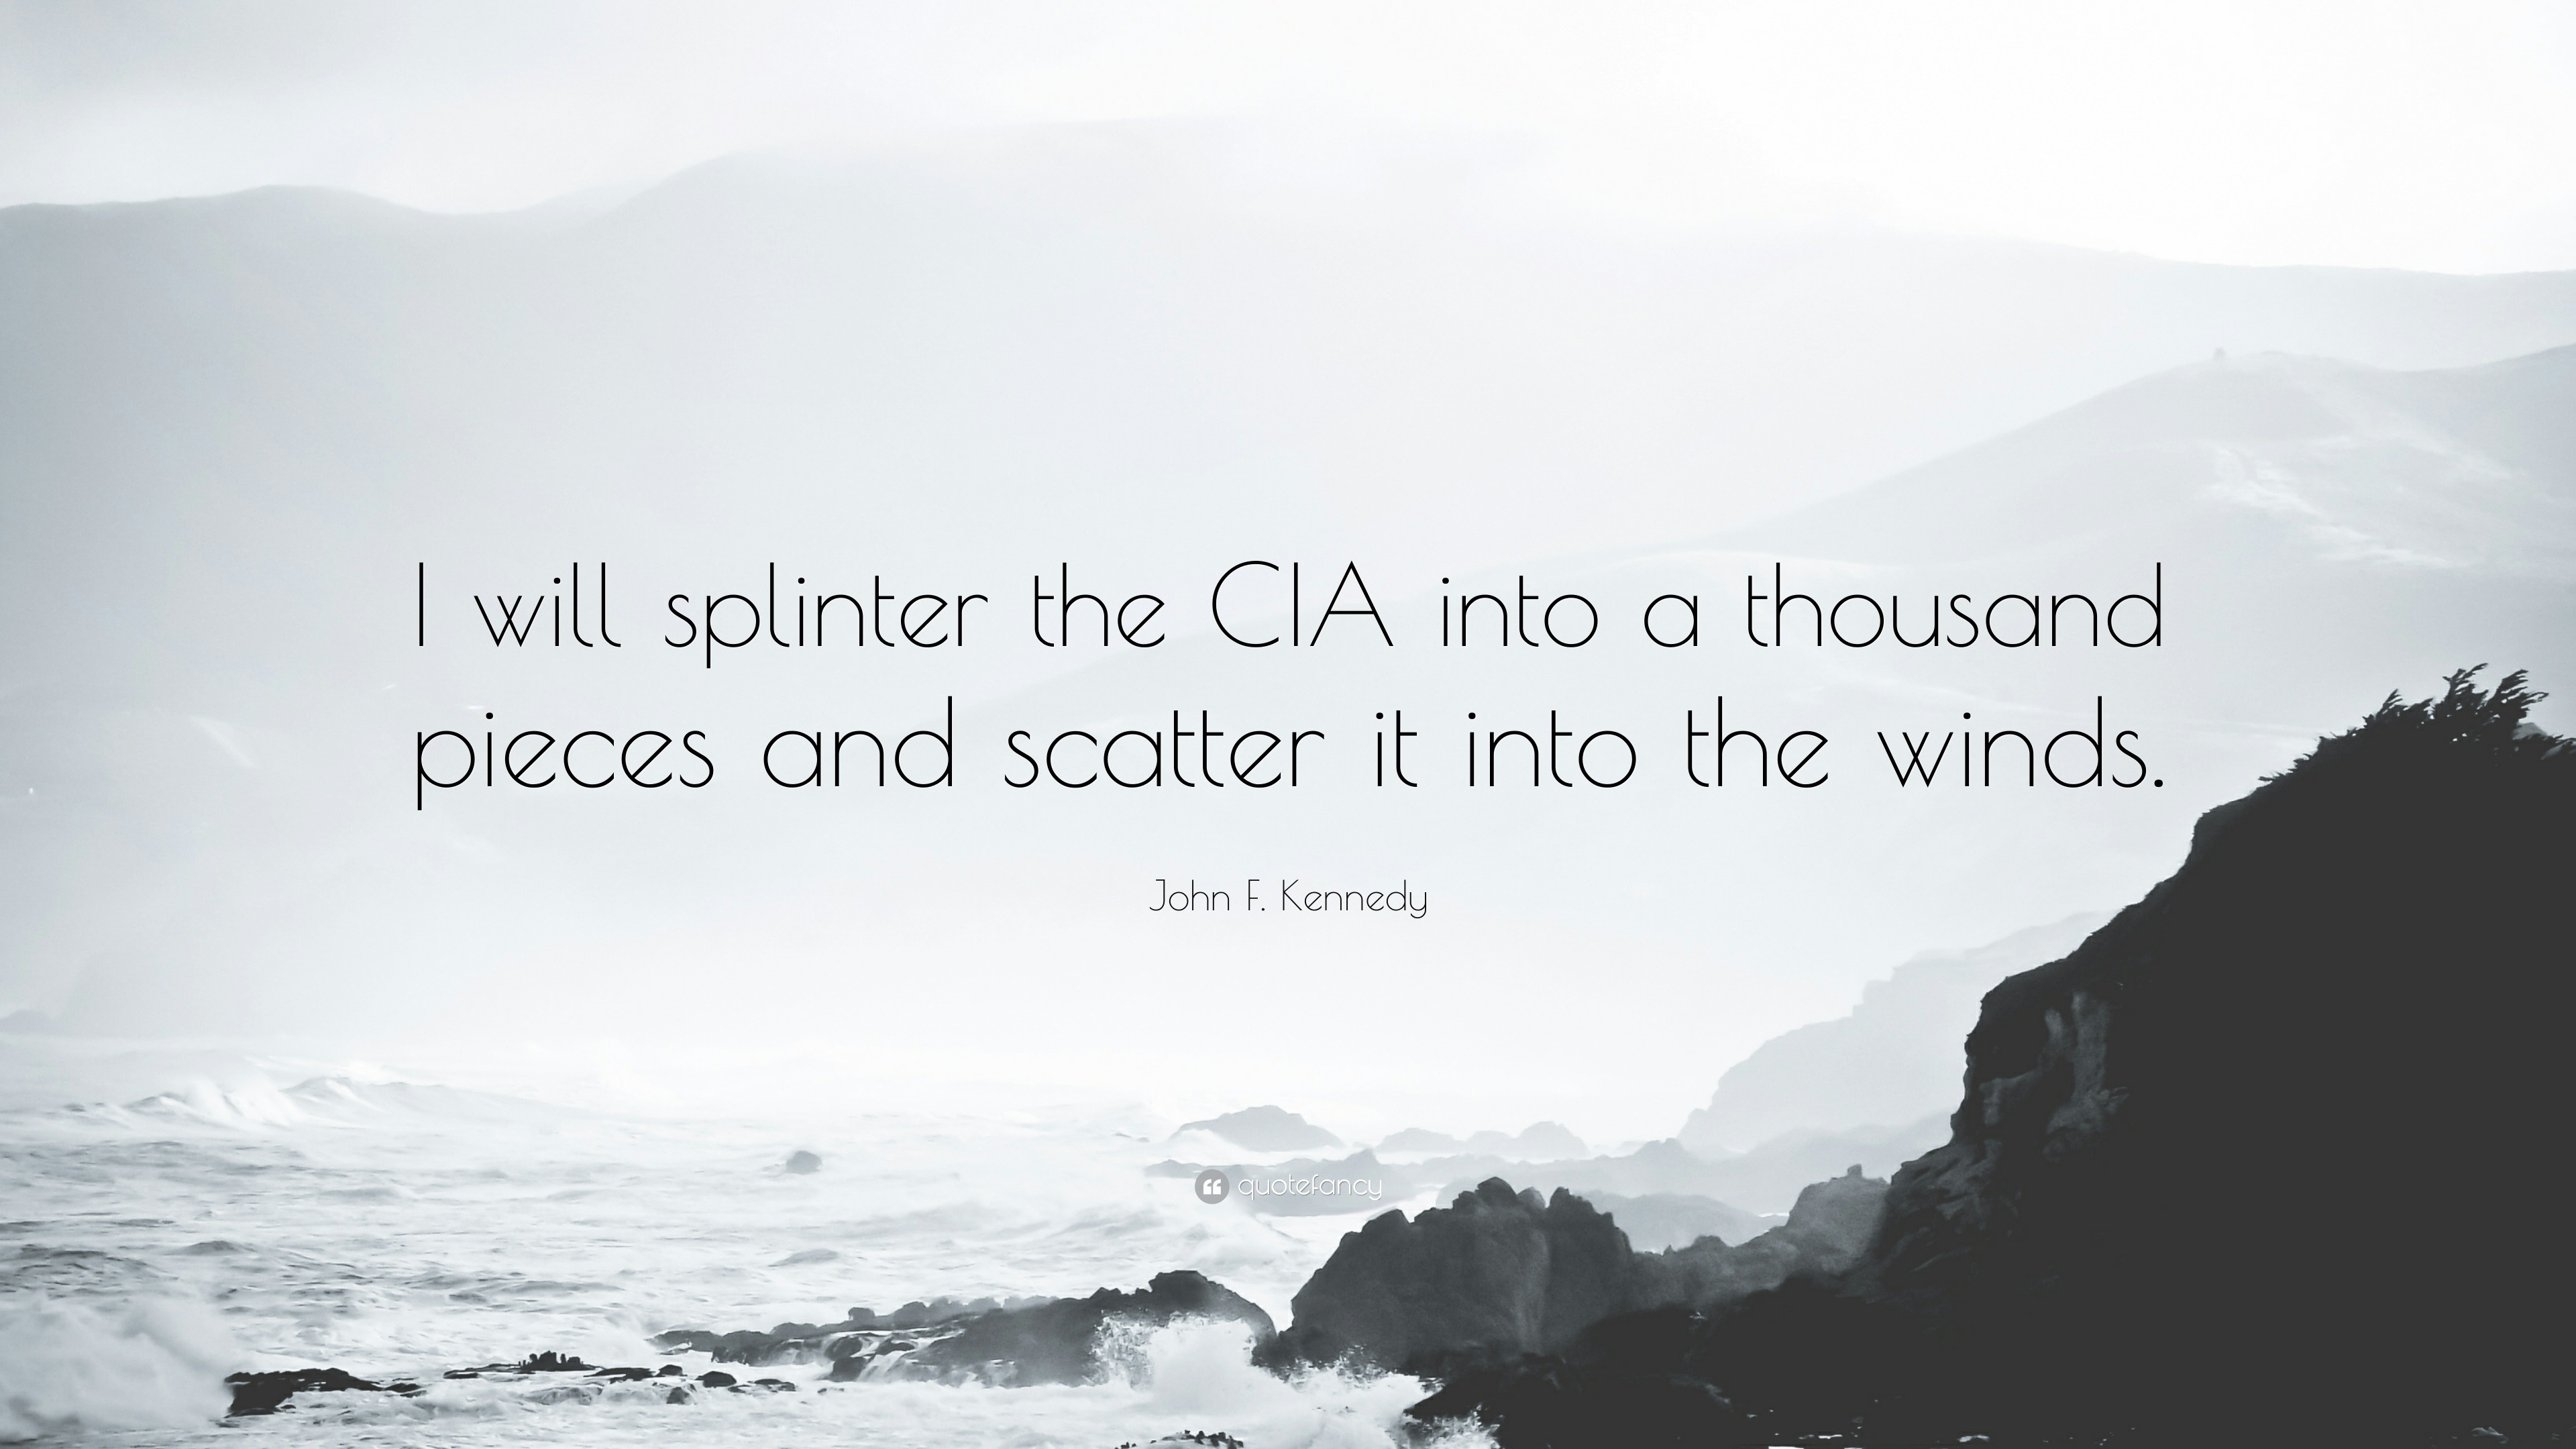 John F. Kennedy Quote: “I will splinter the CIA into a thousand pieces